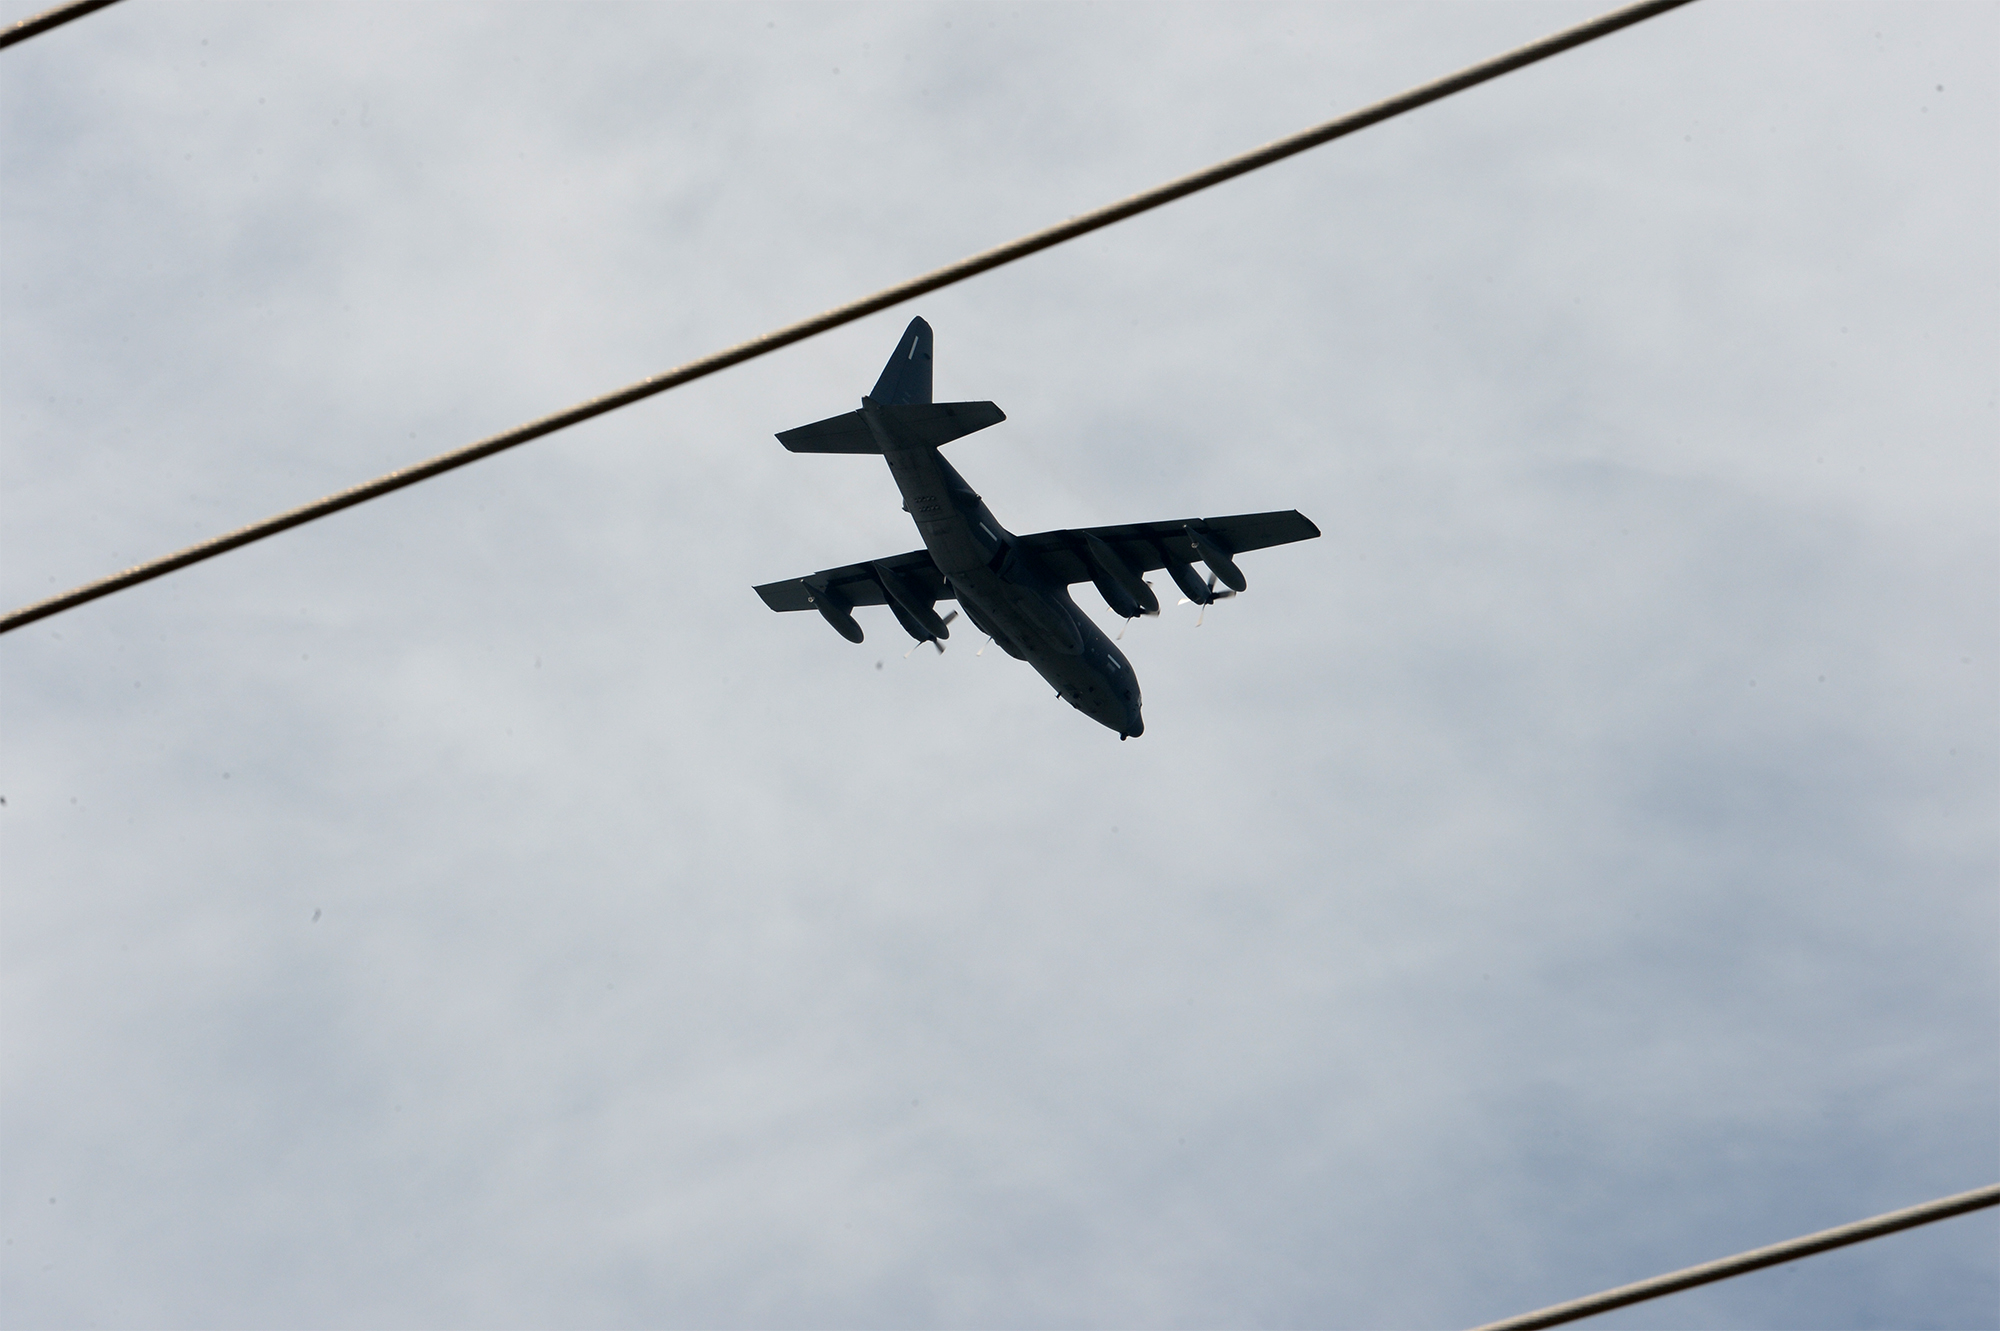 SETX If you see a large military plane flying low, don't be alarmed